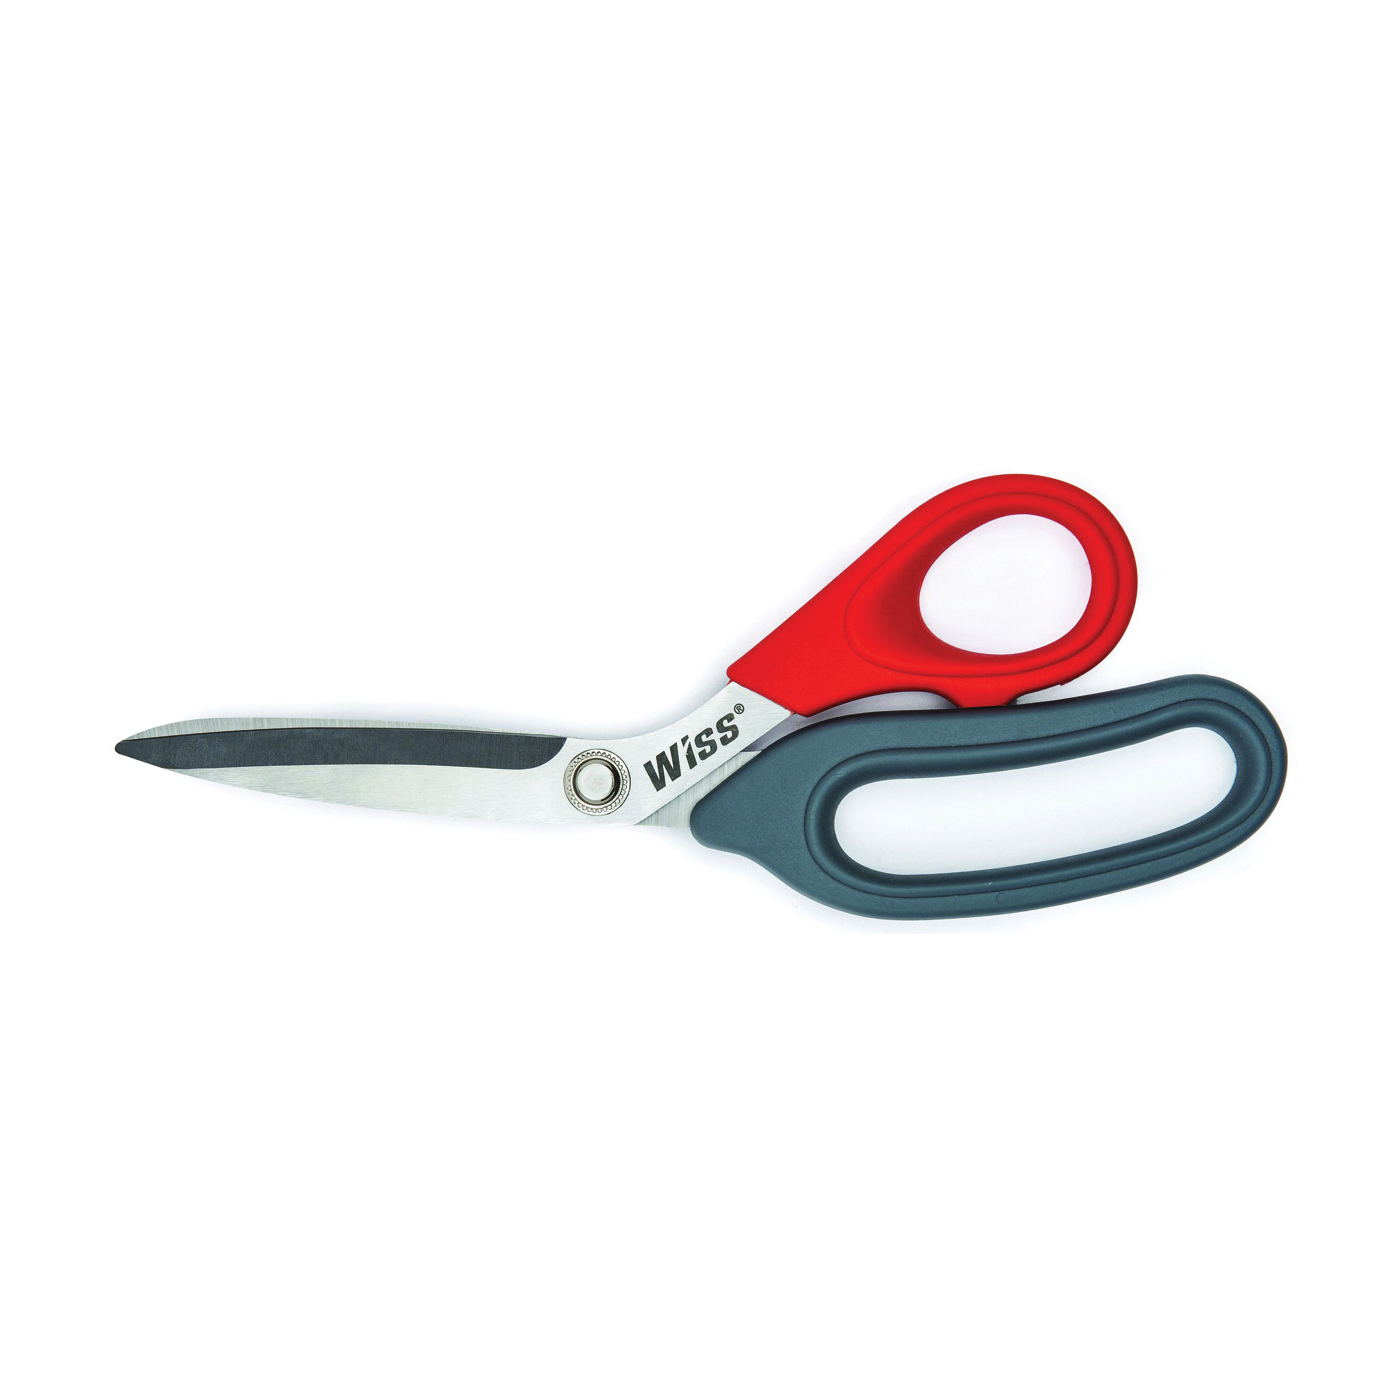 Crescent Wiss W812S Household Scissor, 8-1/2 in OAL, 3-1/2 in L Cut, Stainless Steel Blade, Gray/Red Handle - 1